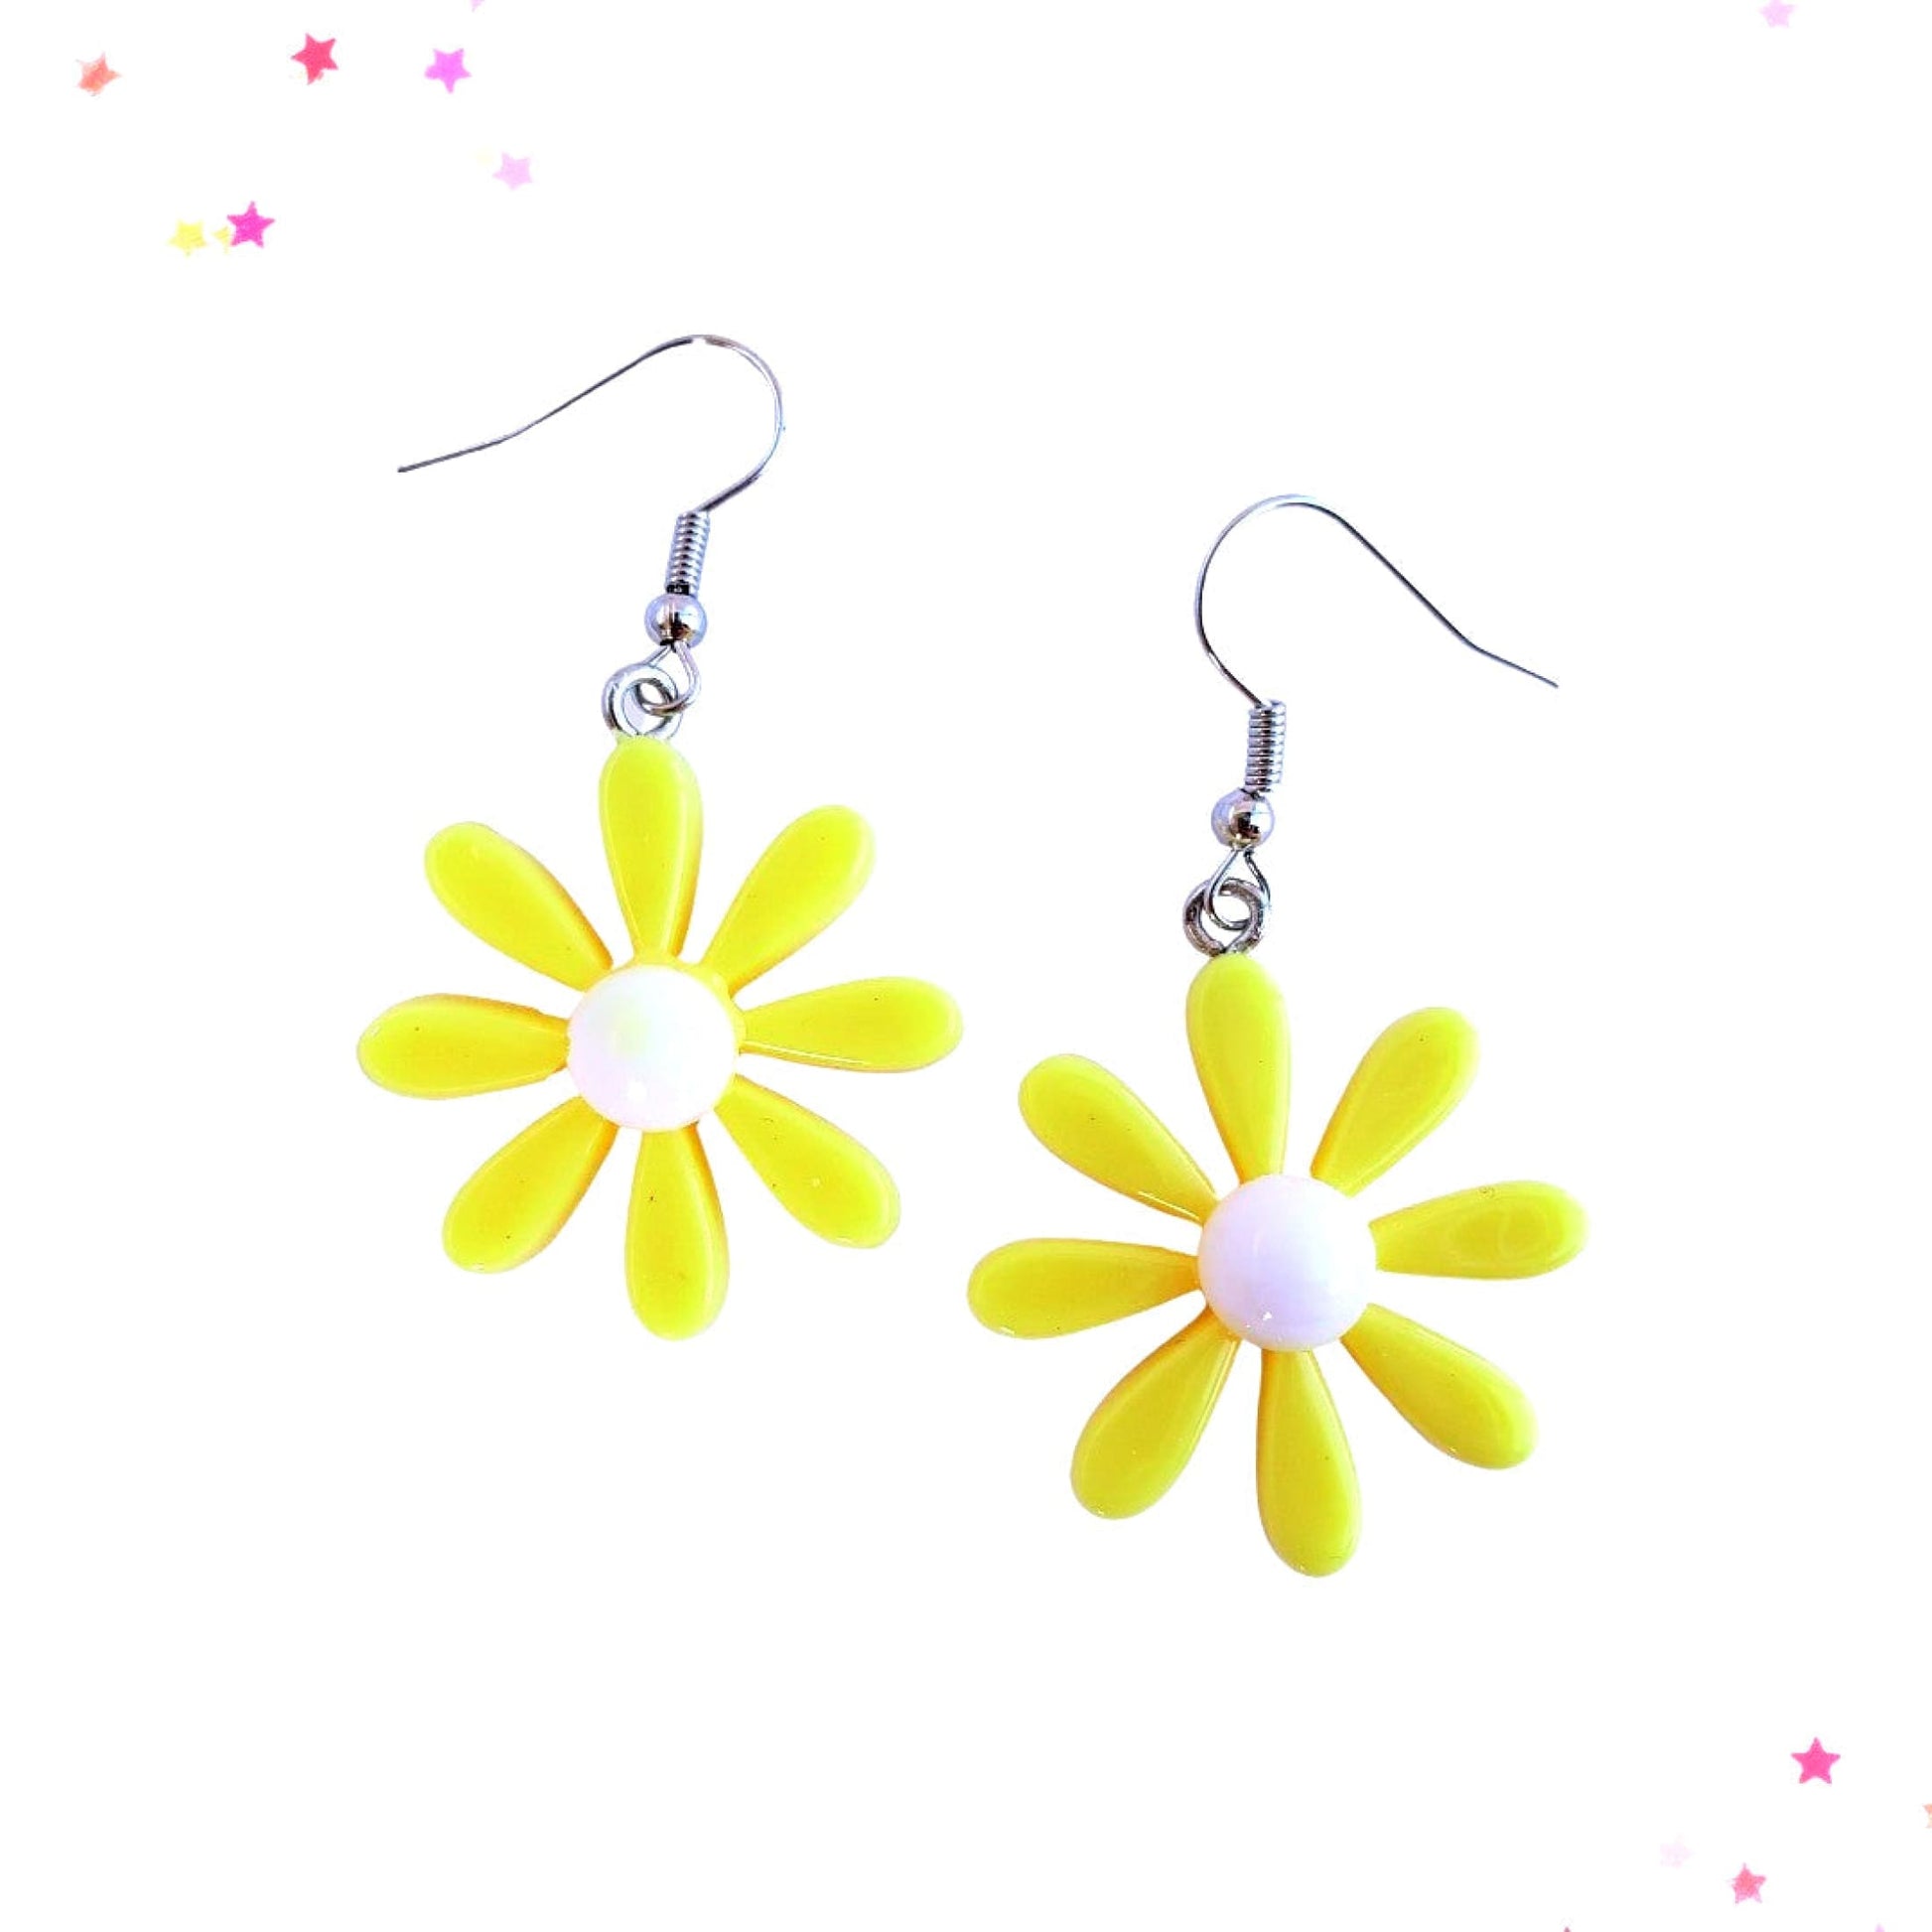 Daisy Drop Earrings in Pale Yellow from Confetti Kitty, Only 2.99